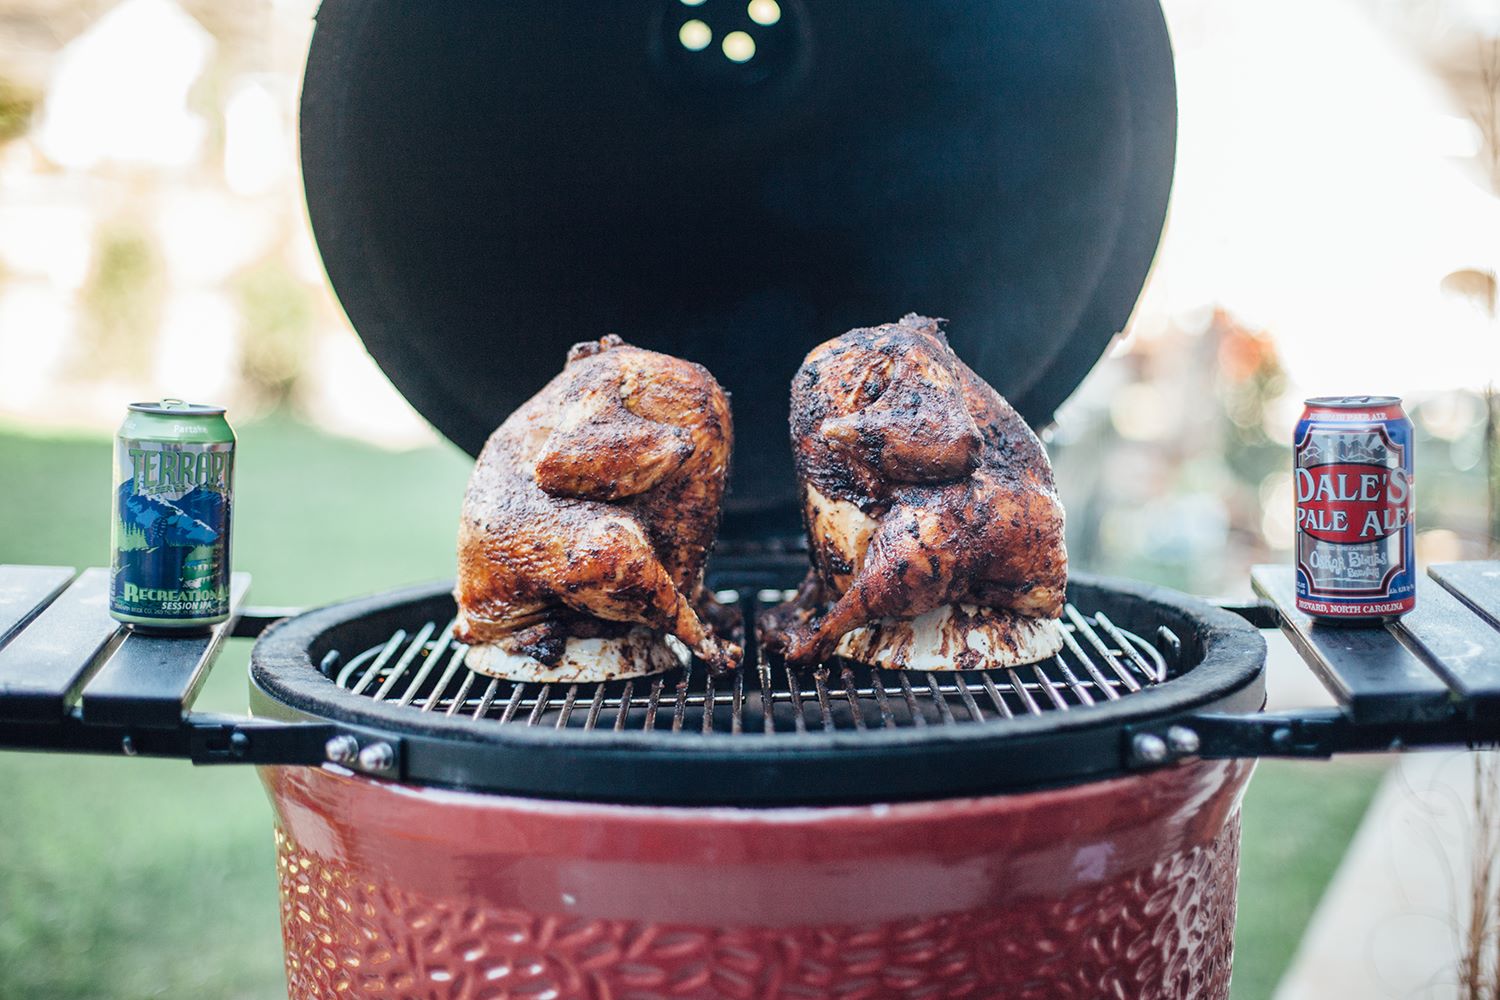 Choose a Grill Dome for exceptional food.